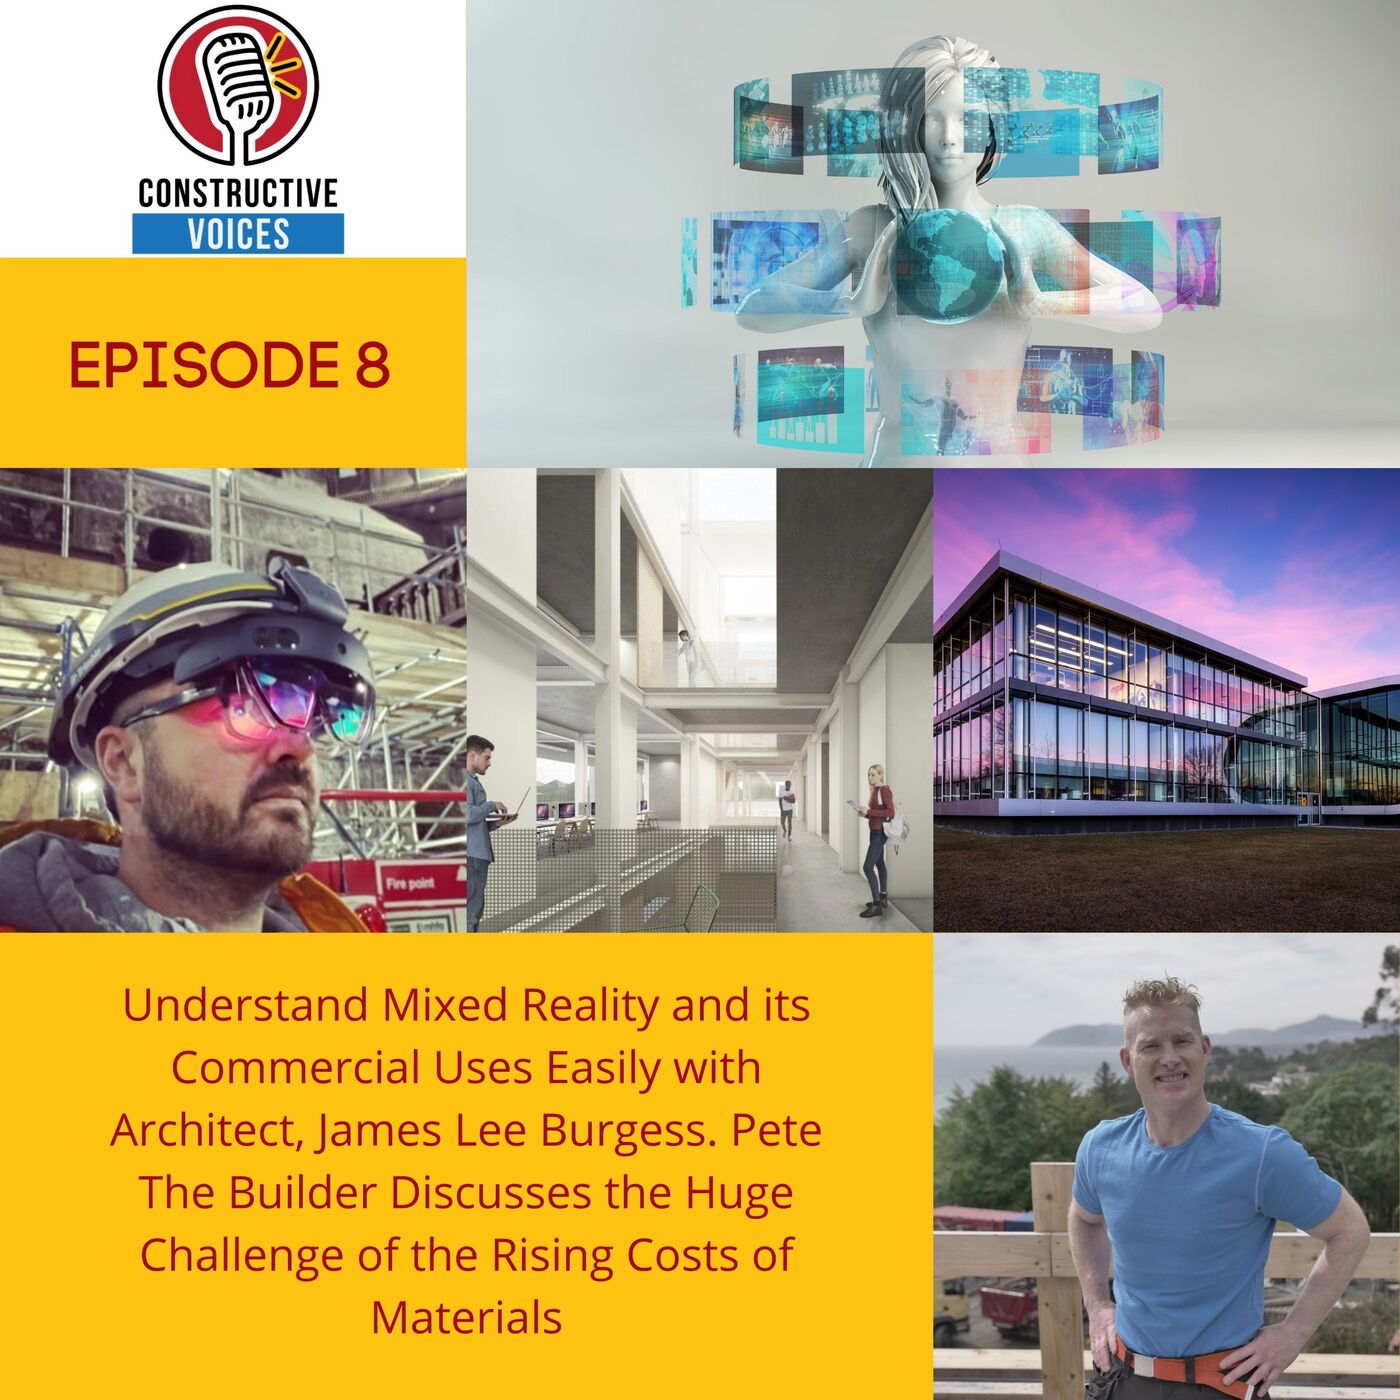 Understand Mixed Reality and its Commercial Uses Easily with Architect, James Lee Burgess. Pete The Builder Discusses the Huge Challenge of the Rising Costs of Materials